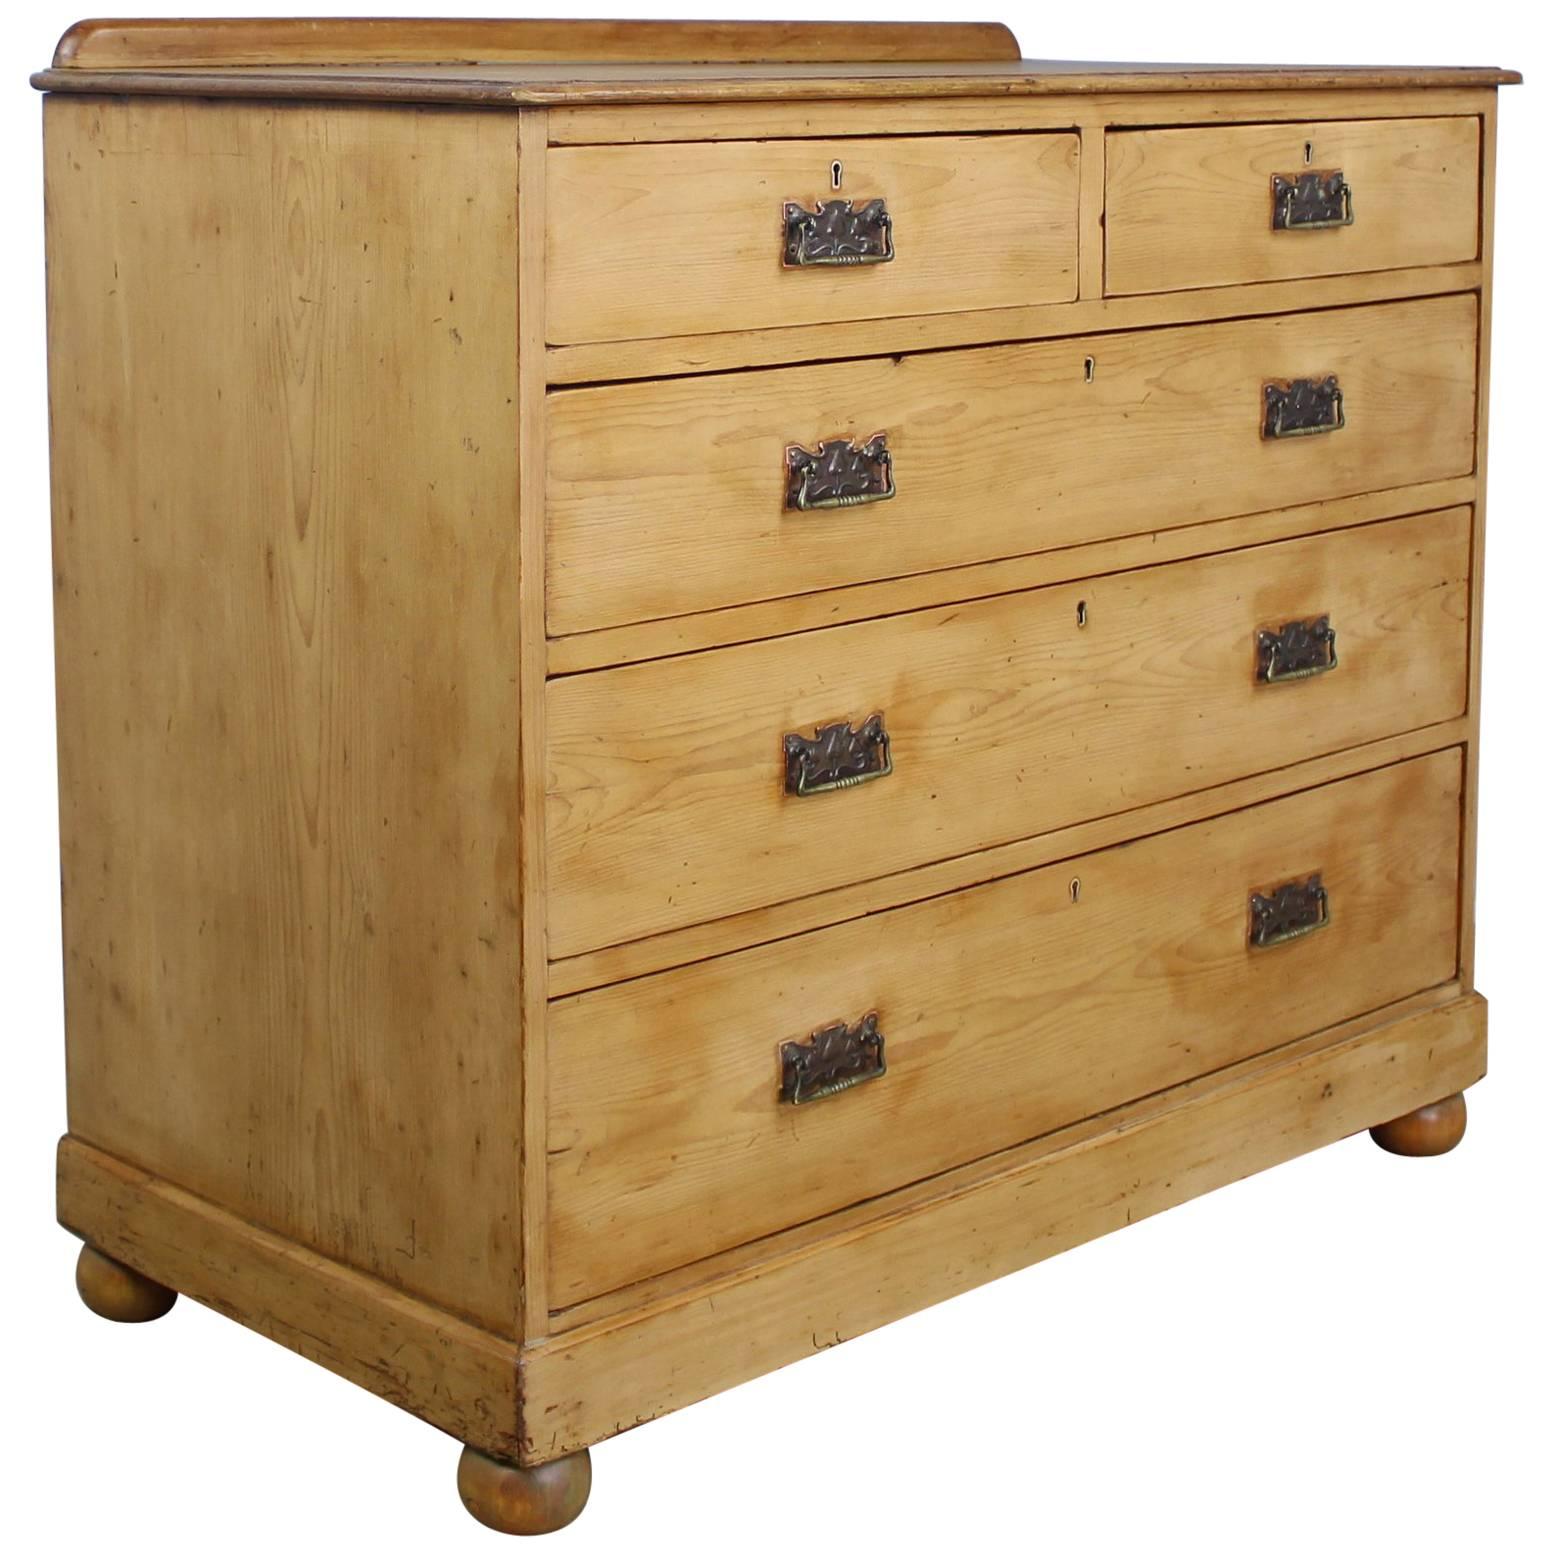 Antique English Pine Chest of Drawers with Decorative Pulls